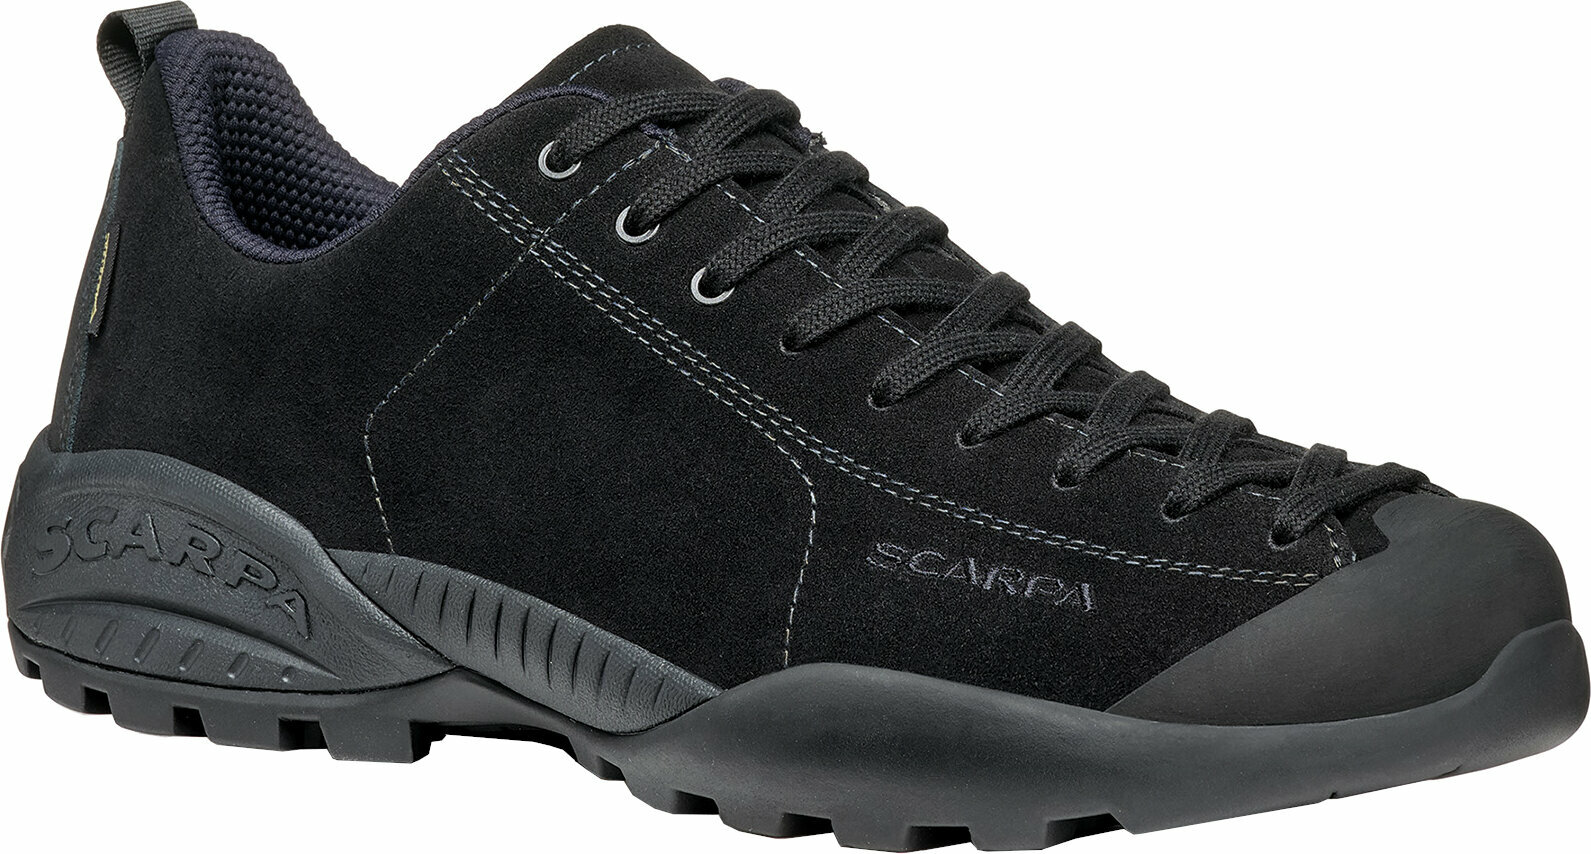 Chaussures outdoor hommes Scarpa Mojito GTX Black 45 Chaussures outdoor hommes